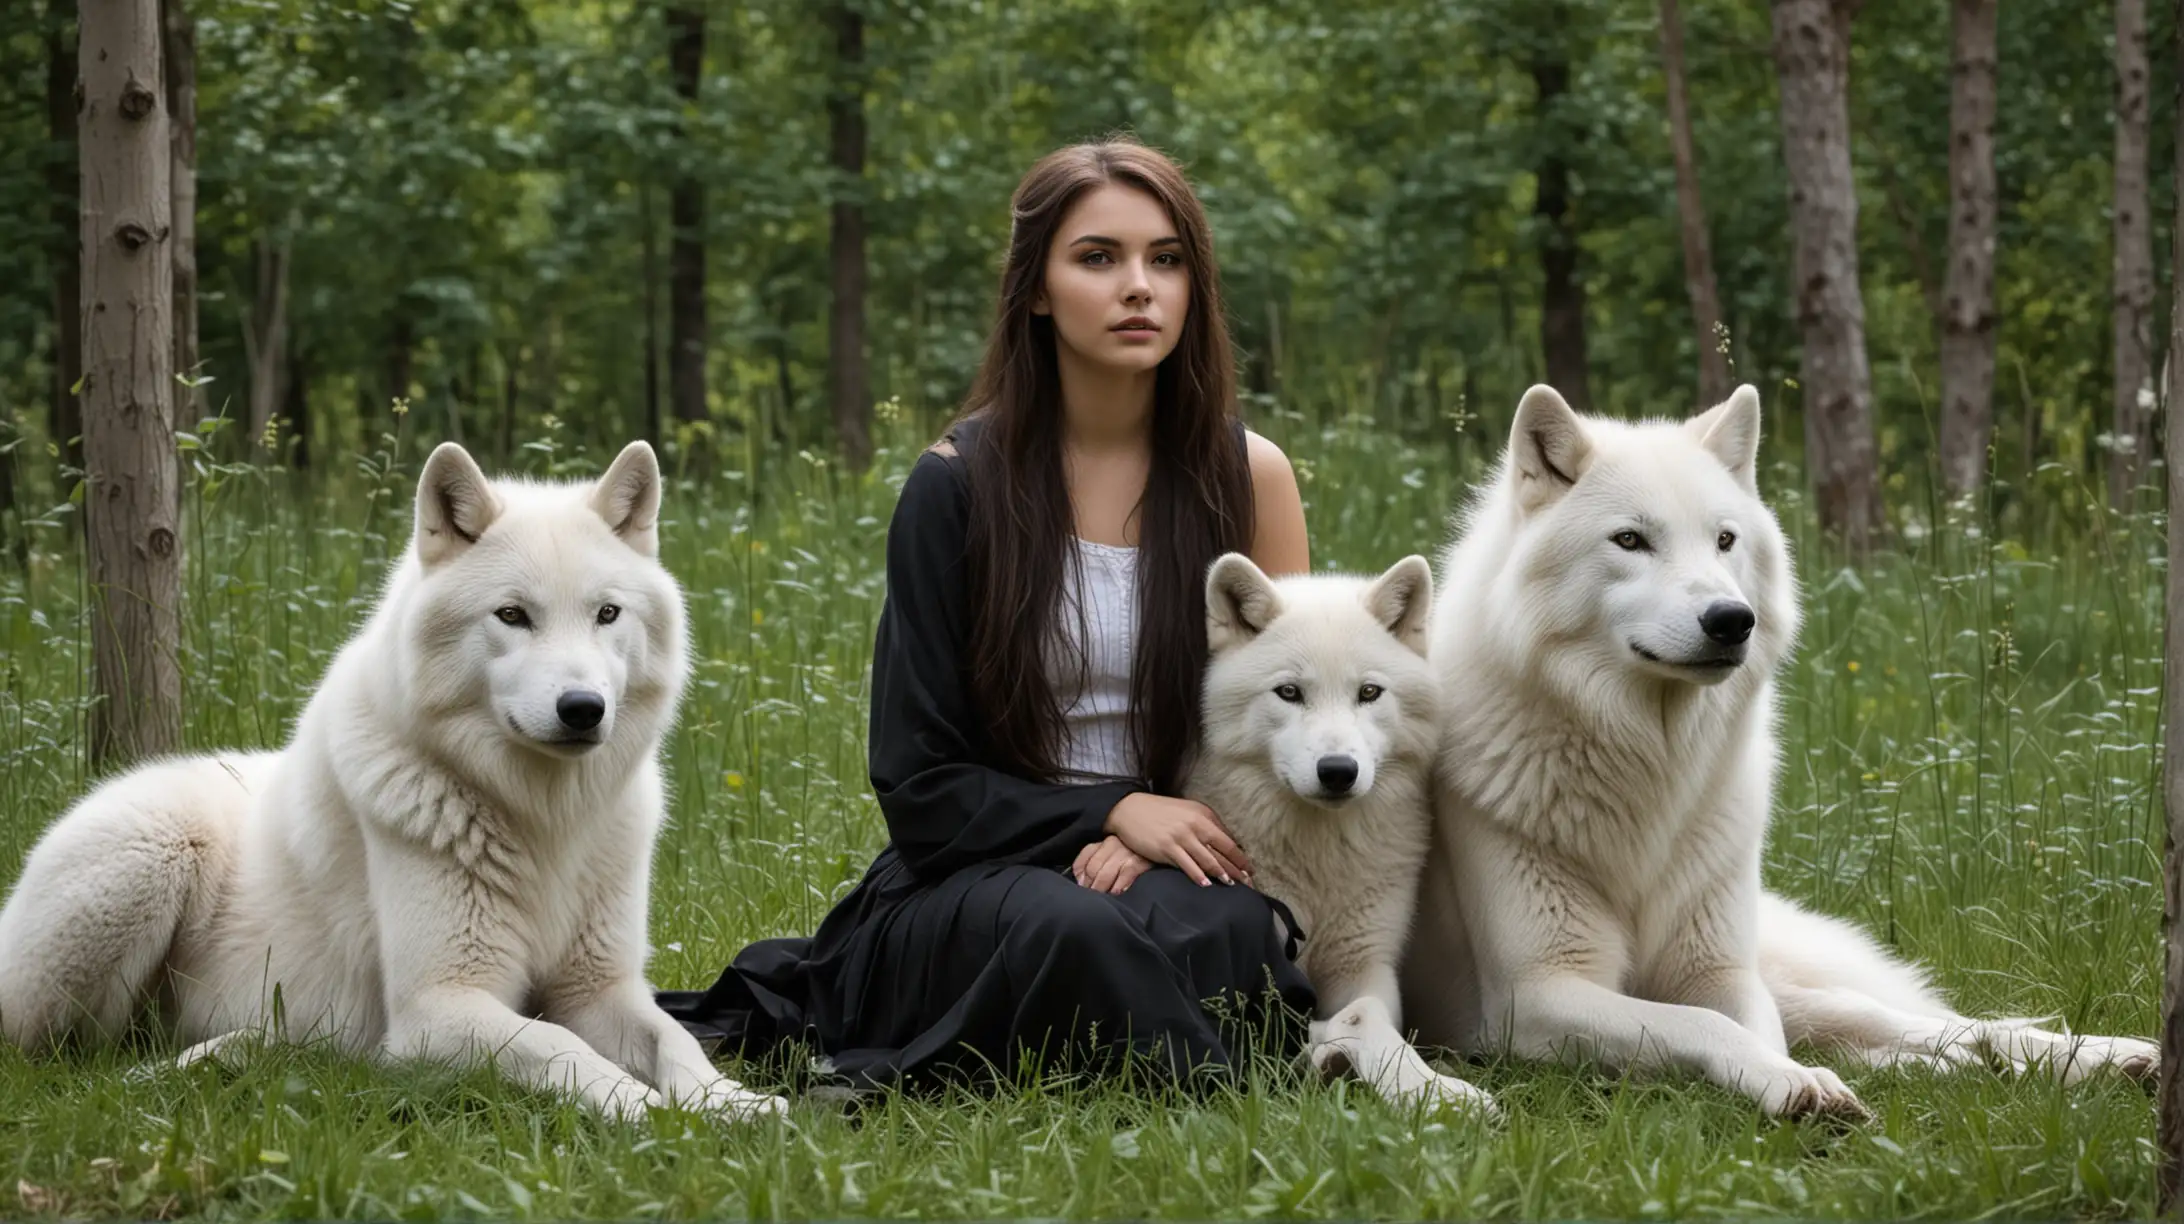 A beautiful YOUNG GIRLS SITTING AMONG 2 white wolves and 2 black wolves in the grass in the forest 